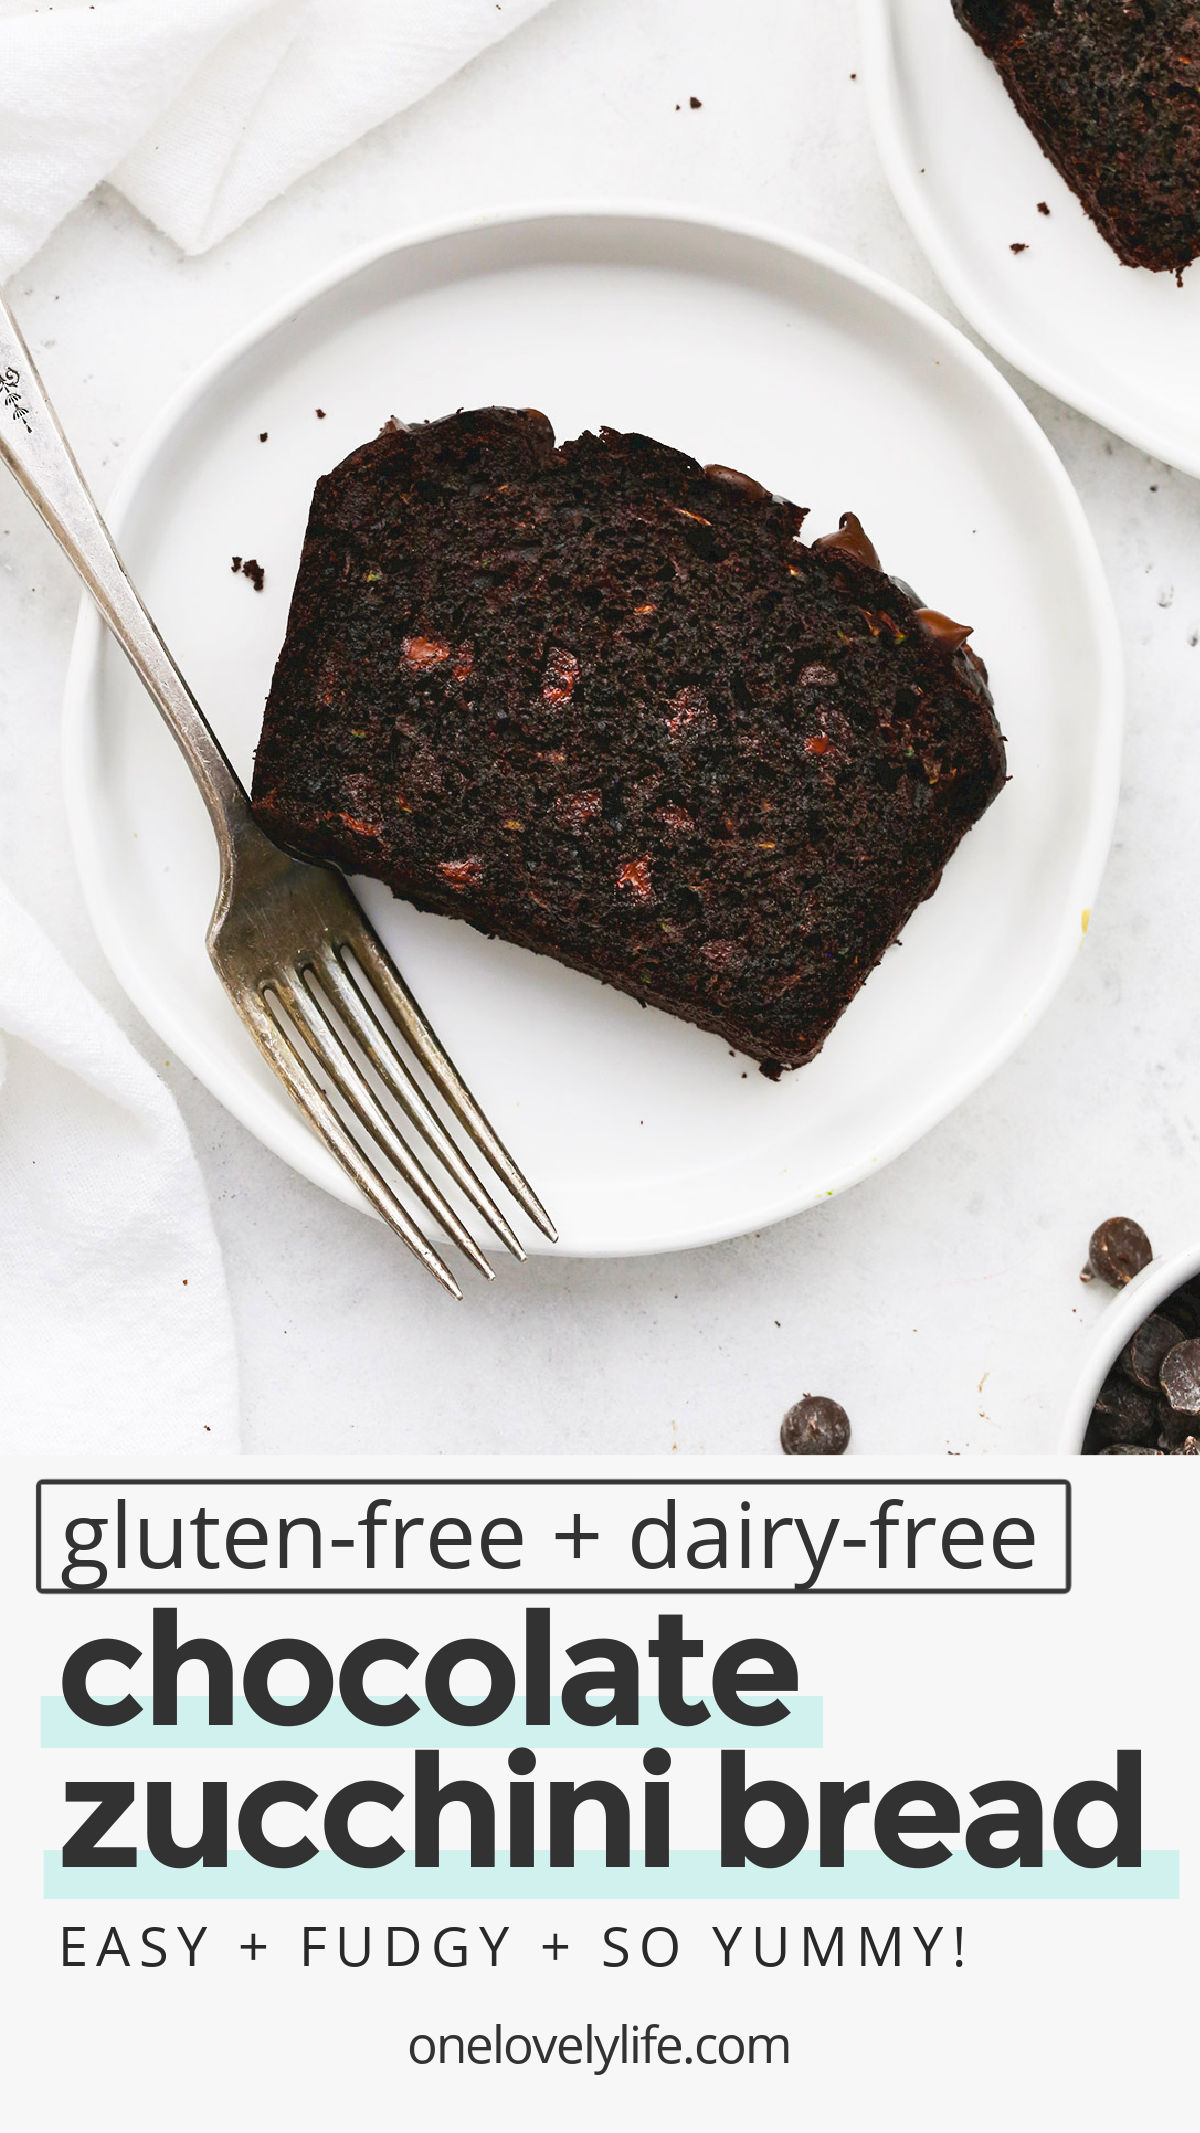 Gluten-Free Chocolate Zucchini Bread - This ultra chocolatey gluten-free zucchini bread is AMAZING. The perfect way to use up extra zucchini in the summer! (Gluten-Free, Dairy-Free) // Gluten Free Zucchini Bread Recipe // Chocolate Chip Zucchini Bread Recipe // Gluten Free Baking #glutenfree #chocolate #zucchini #zucchinibread